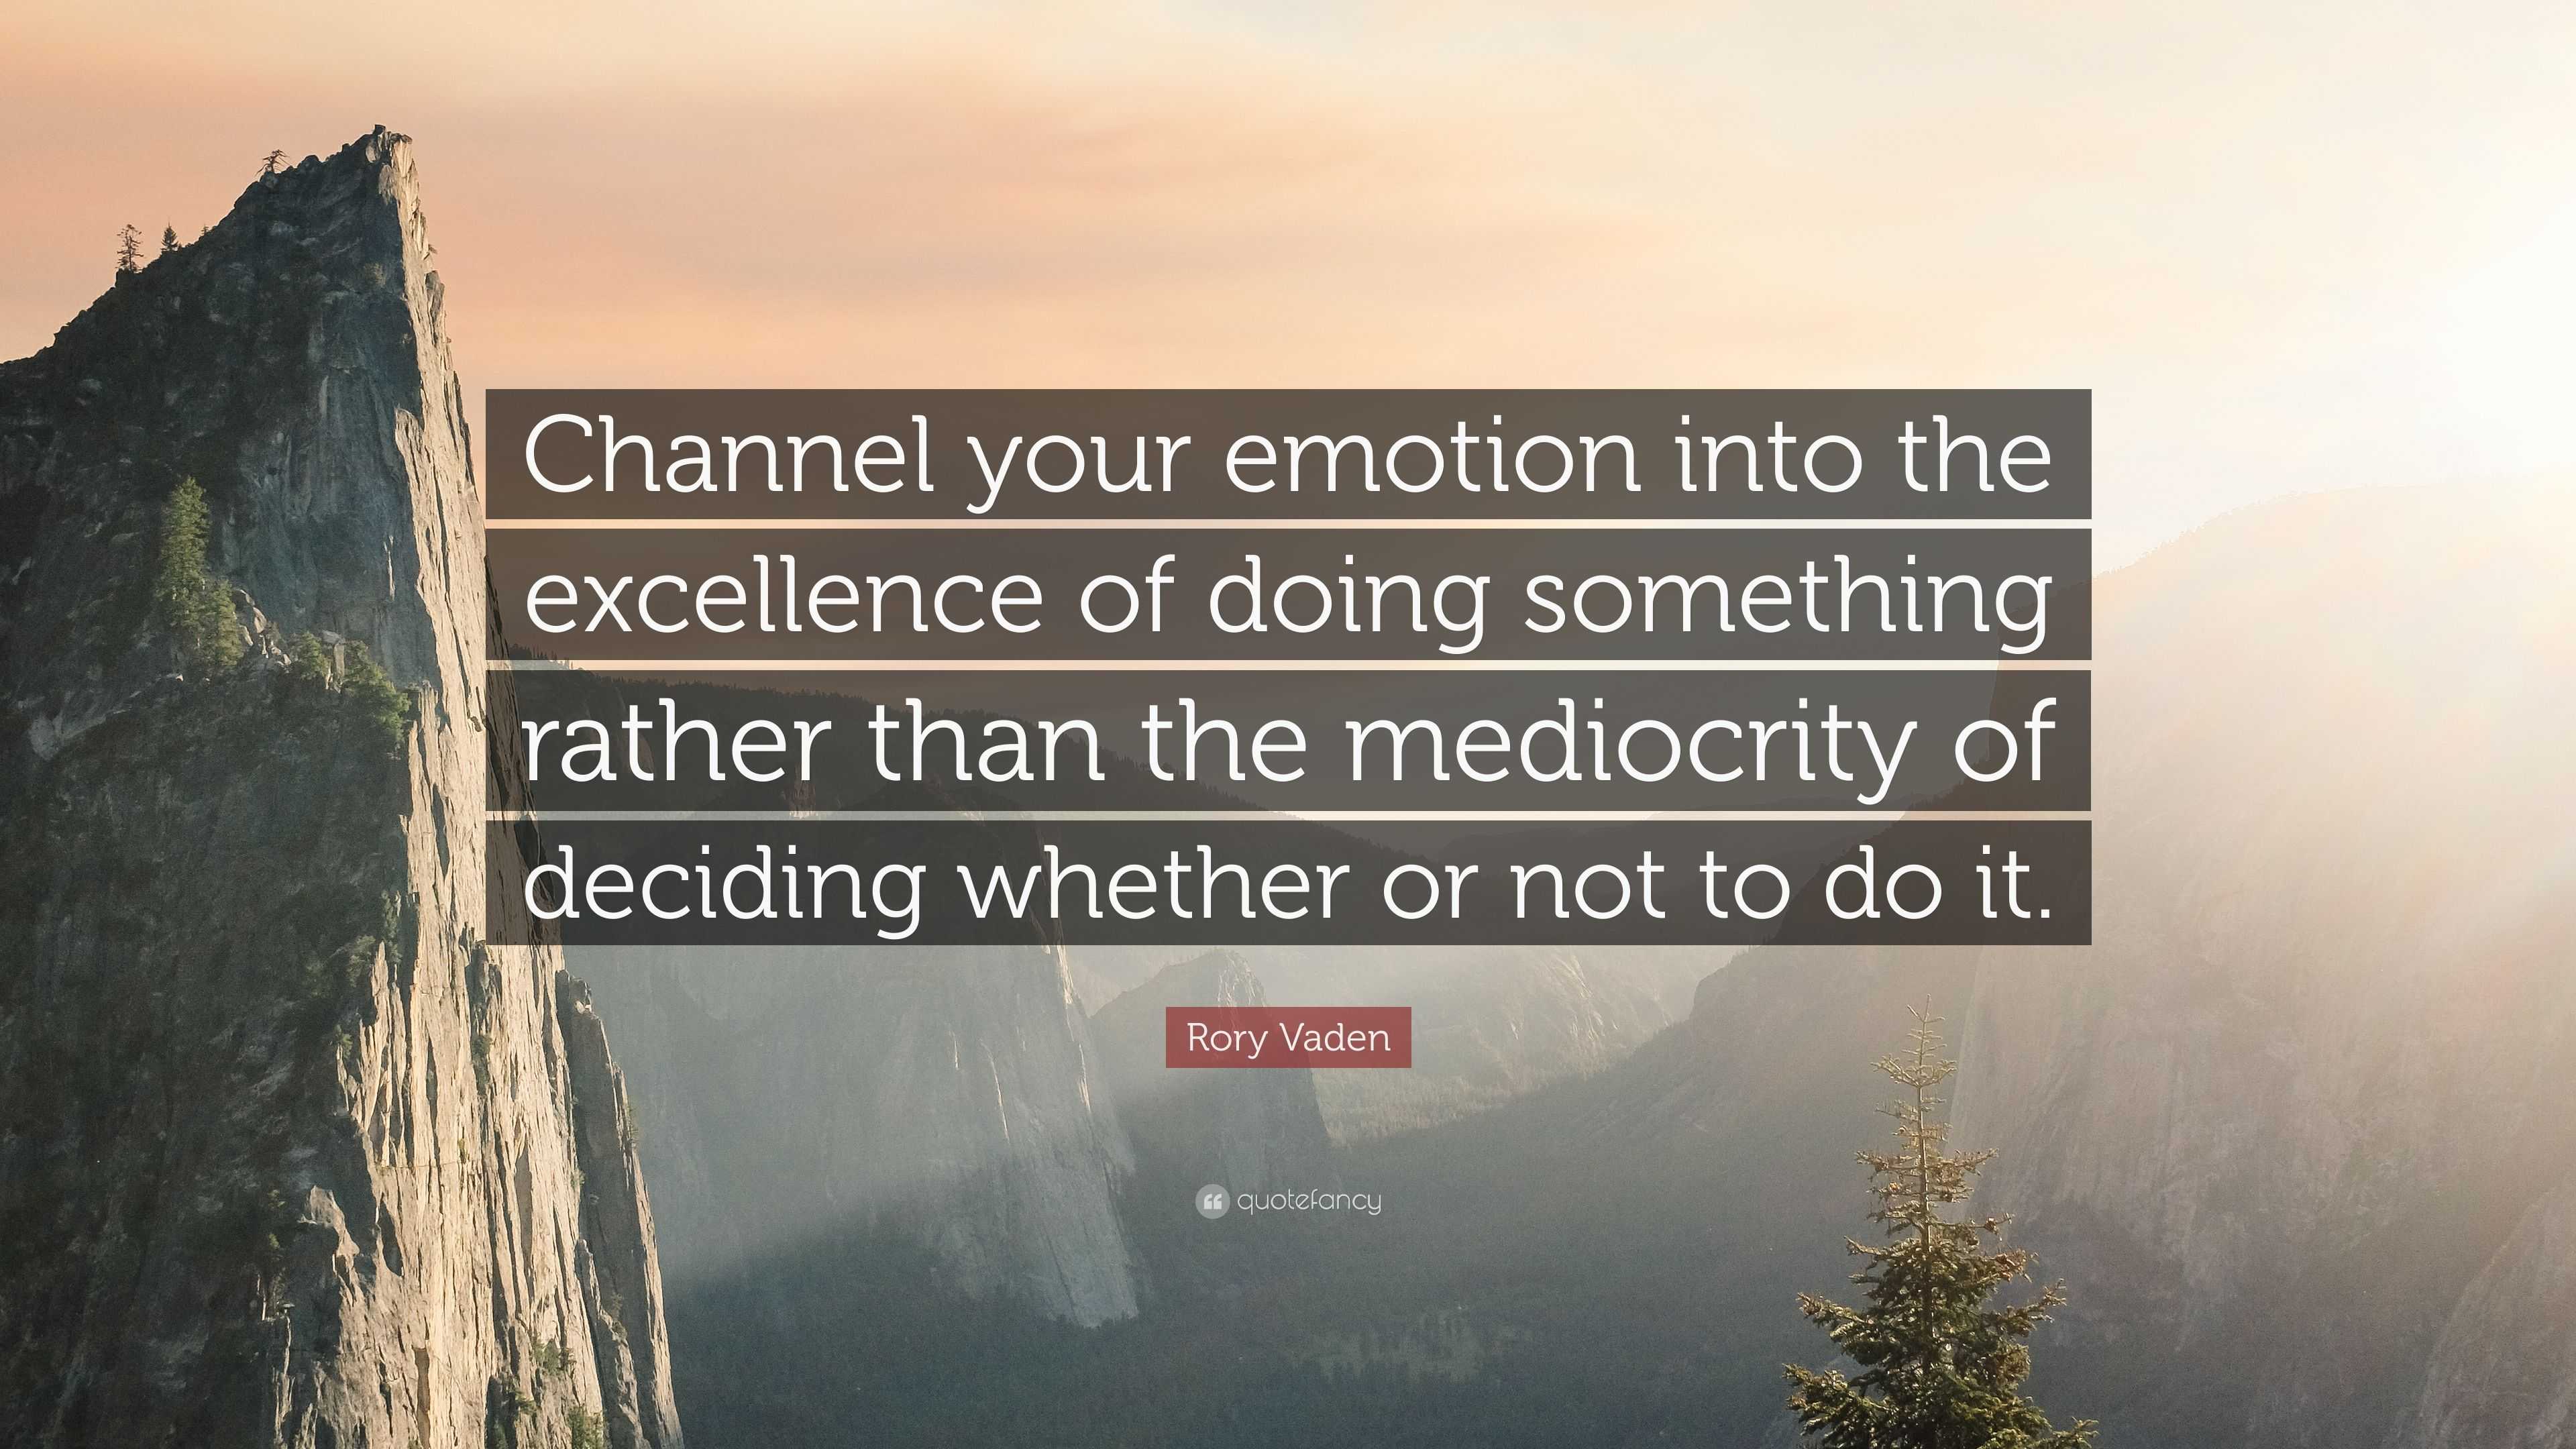 Rory Vaden Quote: “Channel your emotion into the excellence of doing ...